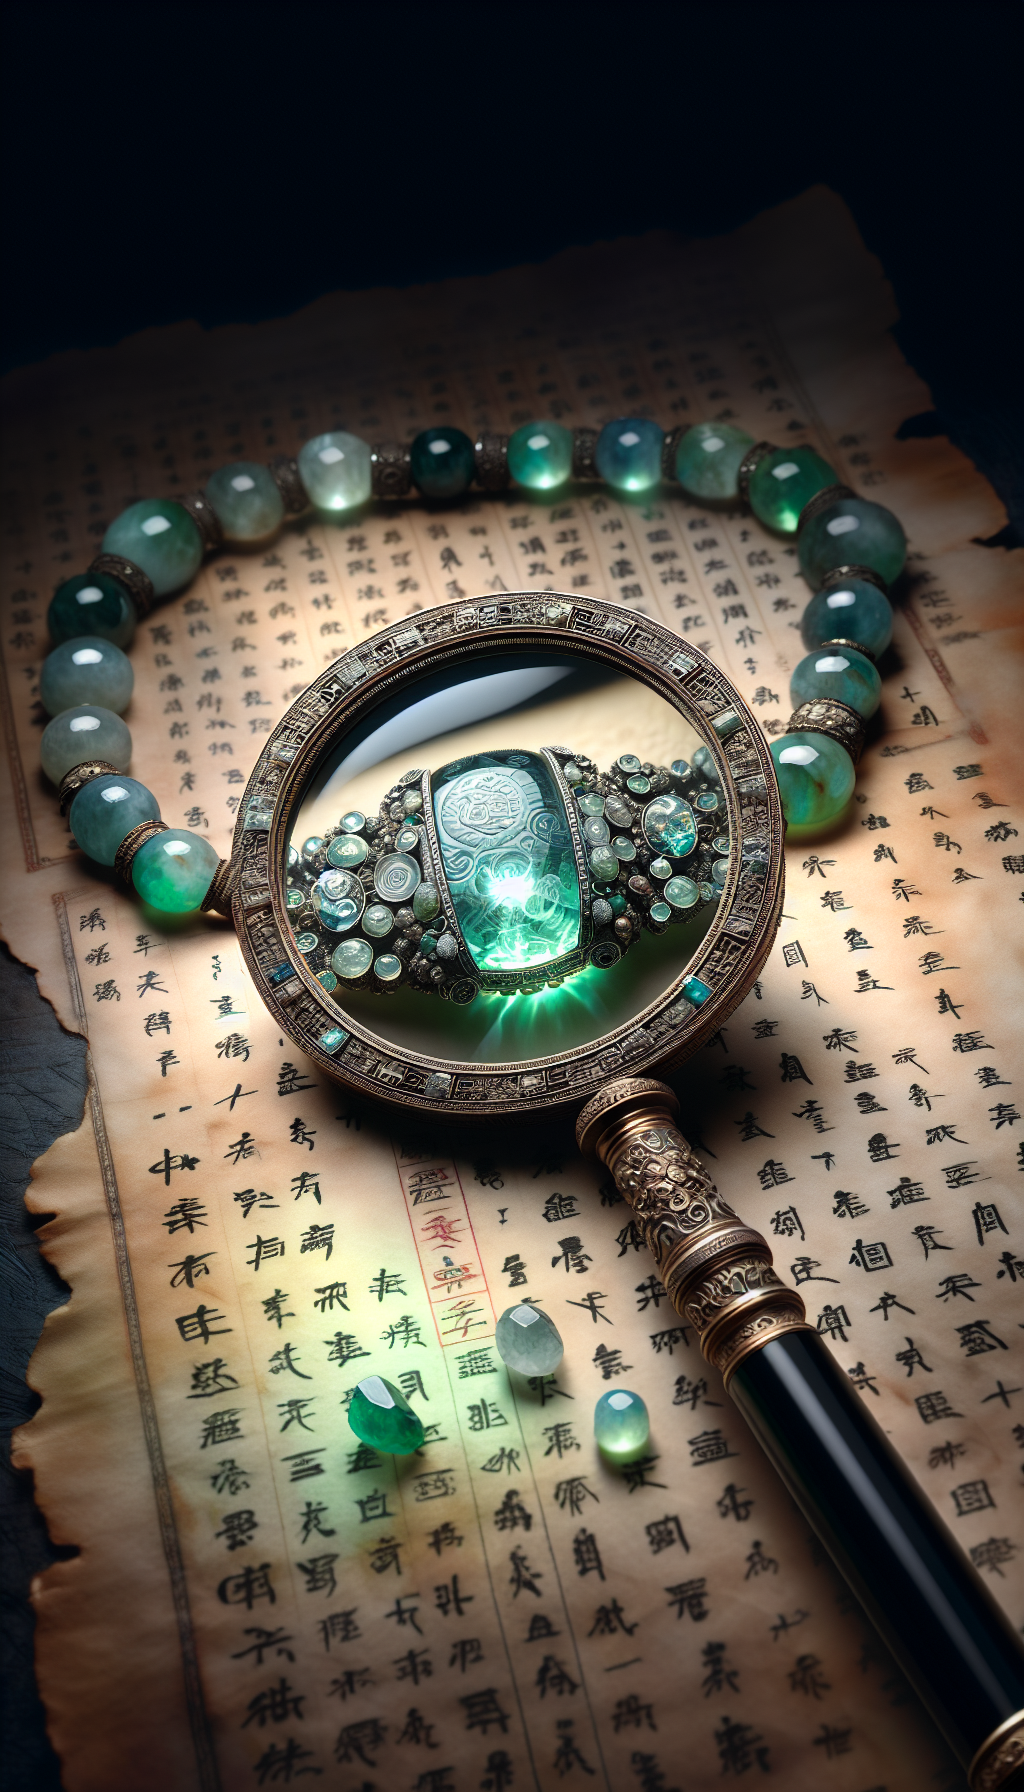 An intricate magnifying glass hovers over an ornate jade necklace, refracting light to reveal a tapestry of historical symbols and authentication marks within its gemstones, set against a backdrop of faded parchment inscribed with ancient Chinese characters. The necklace gleams with a subtle glow, symbolizing its verified antiquity and value.